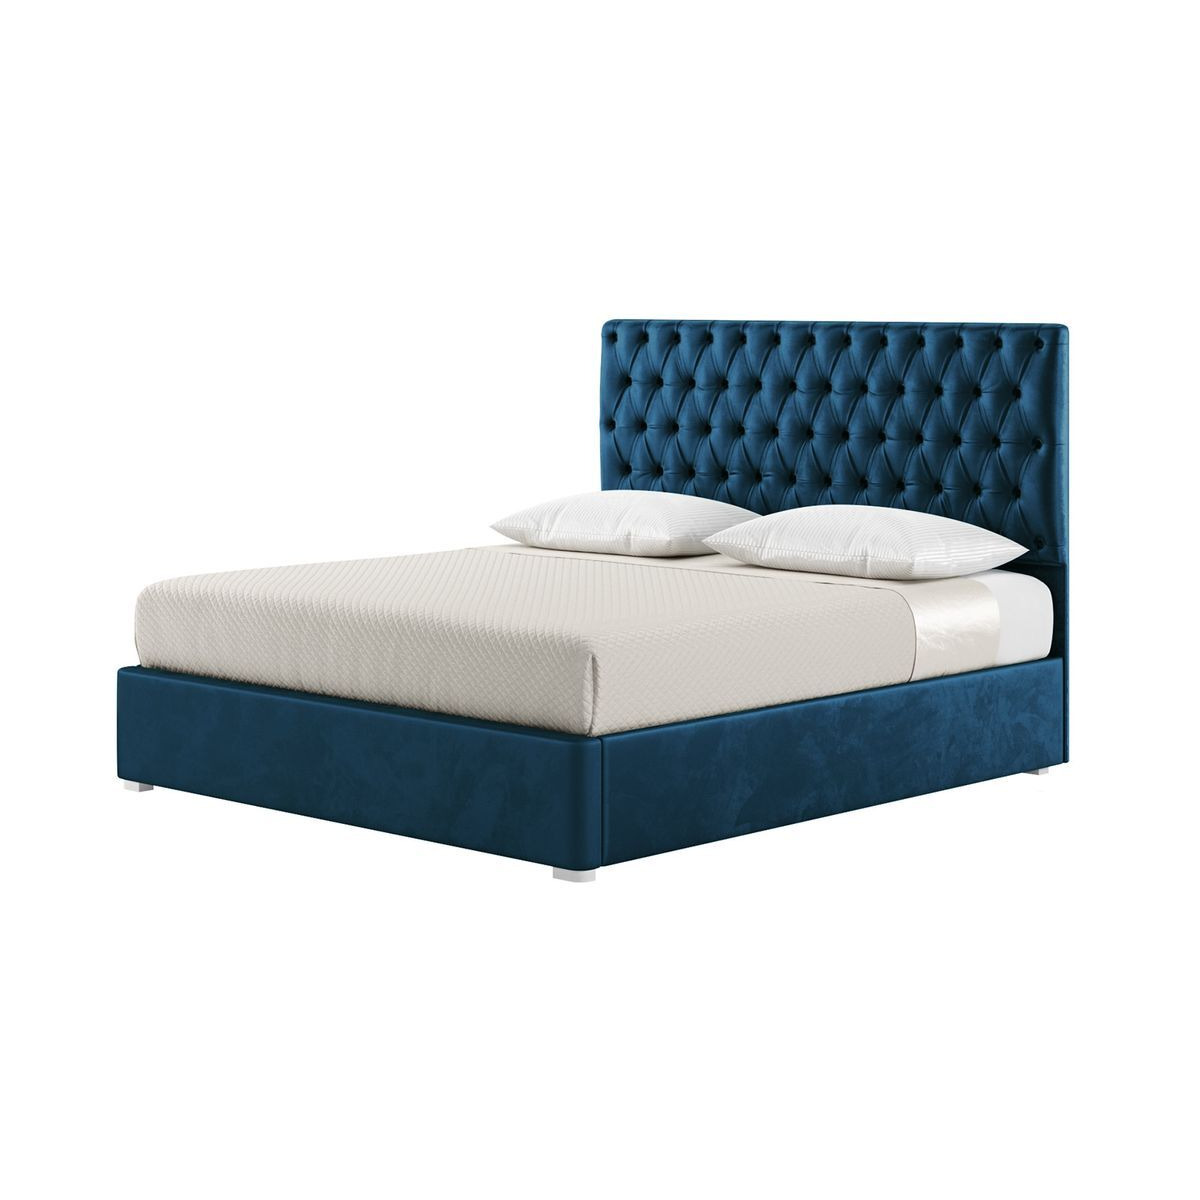 Jewel 6ft Super King Size Bed With Luxury Deep Button Quilted Headboard, blue, Leg colour: white - image 1